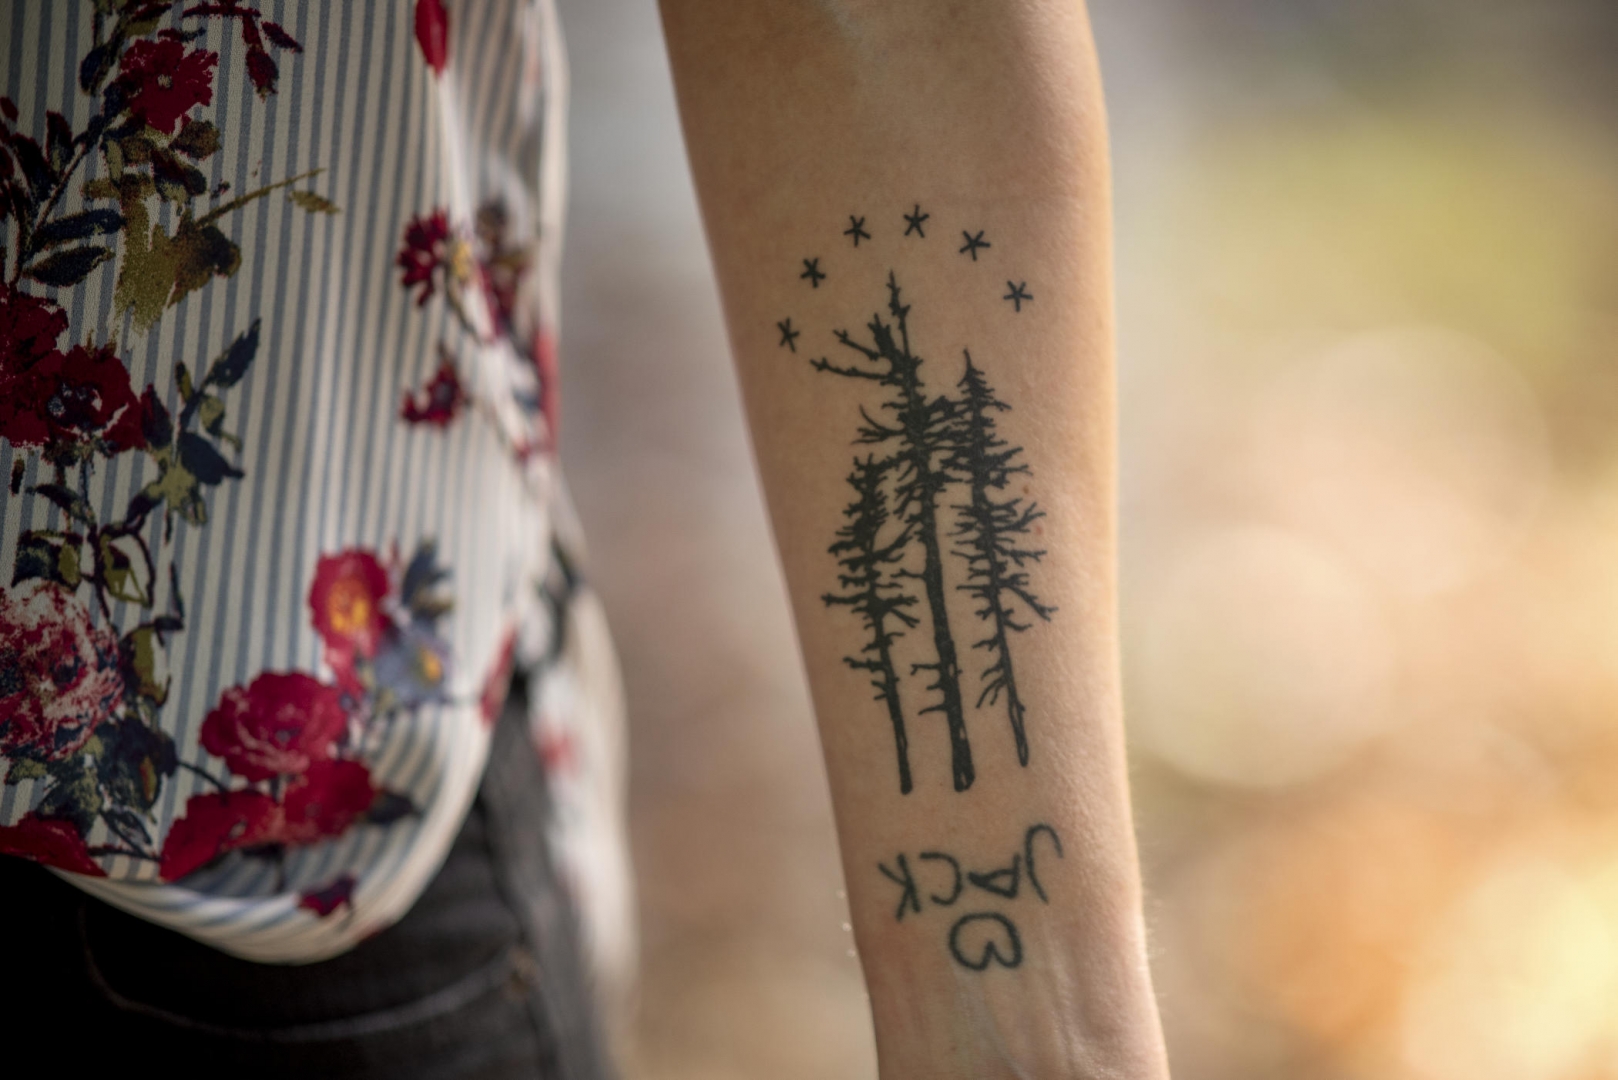 A tattoo on Tamara Bradford's forearm has thee pine trees, the word Jack with a heart above it, and six stars.